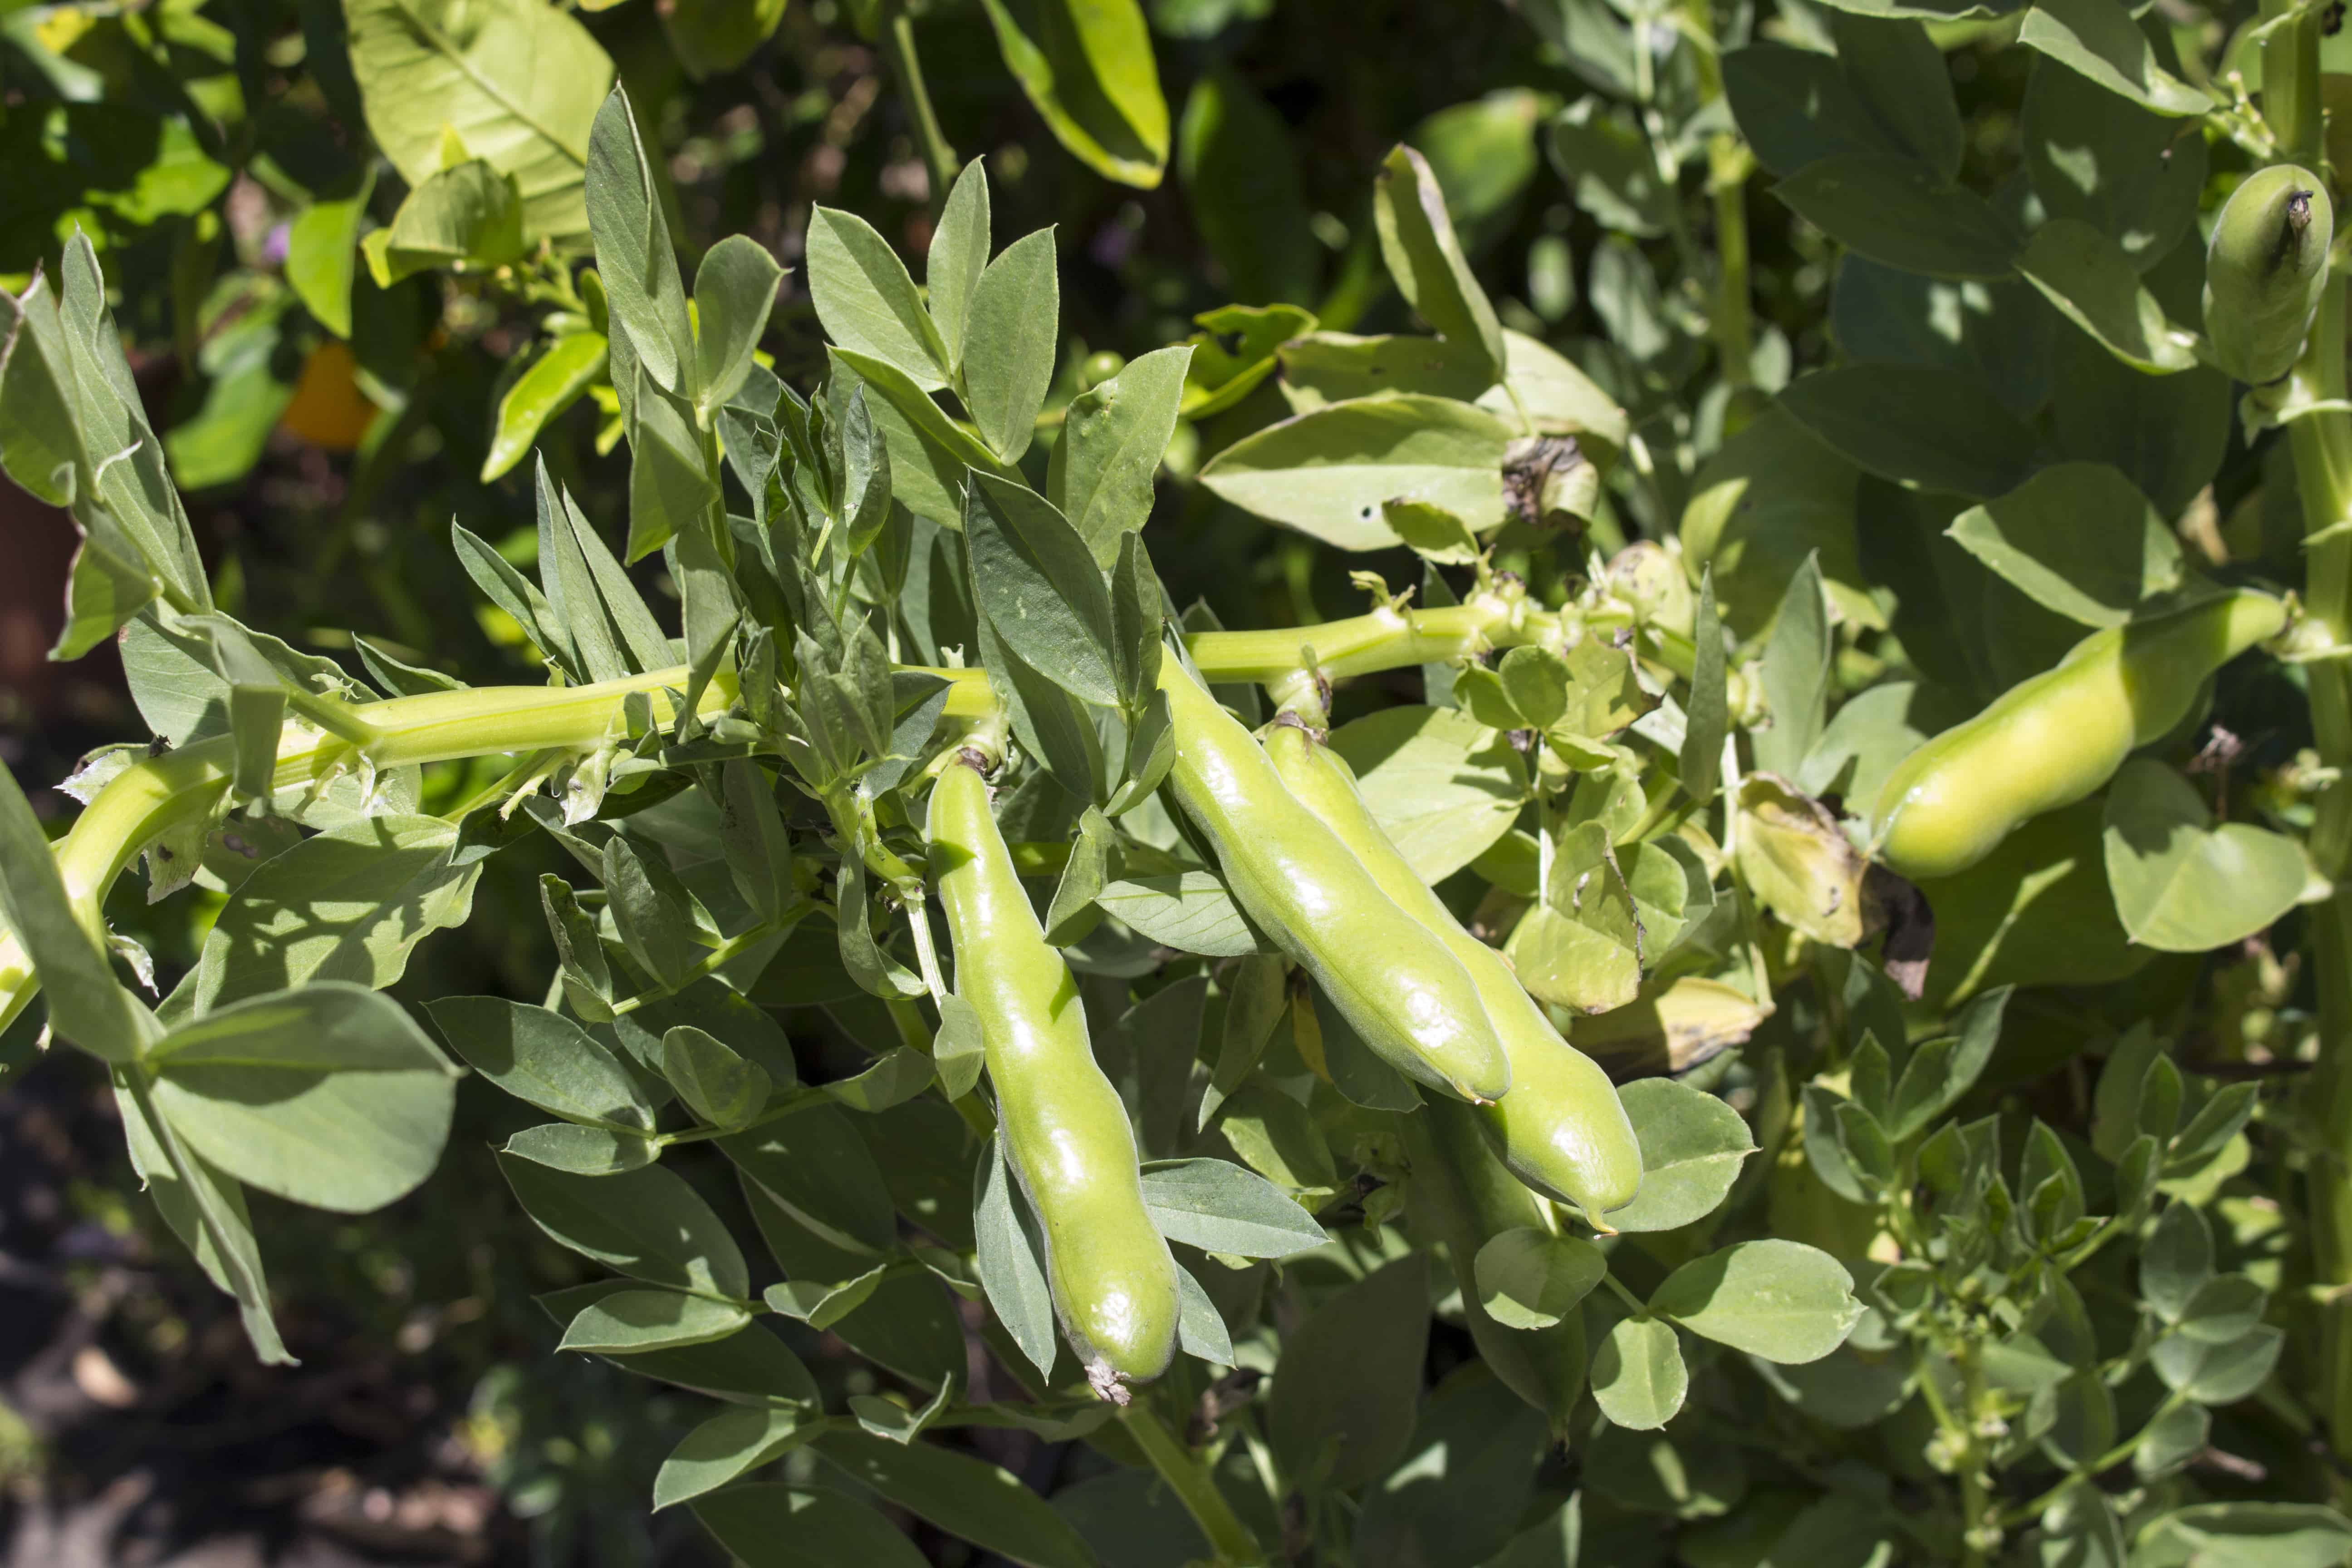 Broad bean pods growing on the plant